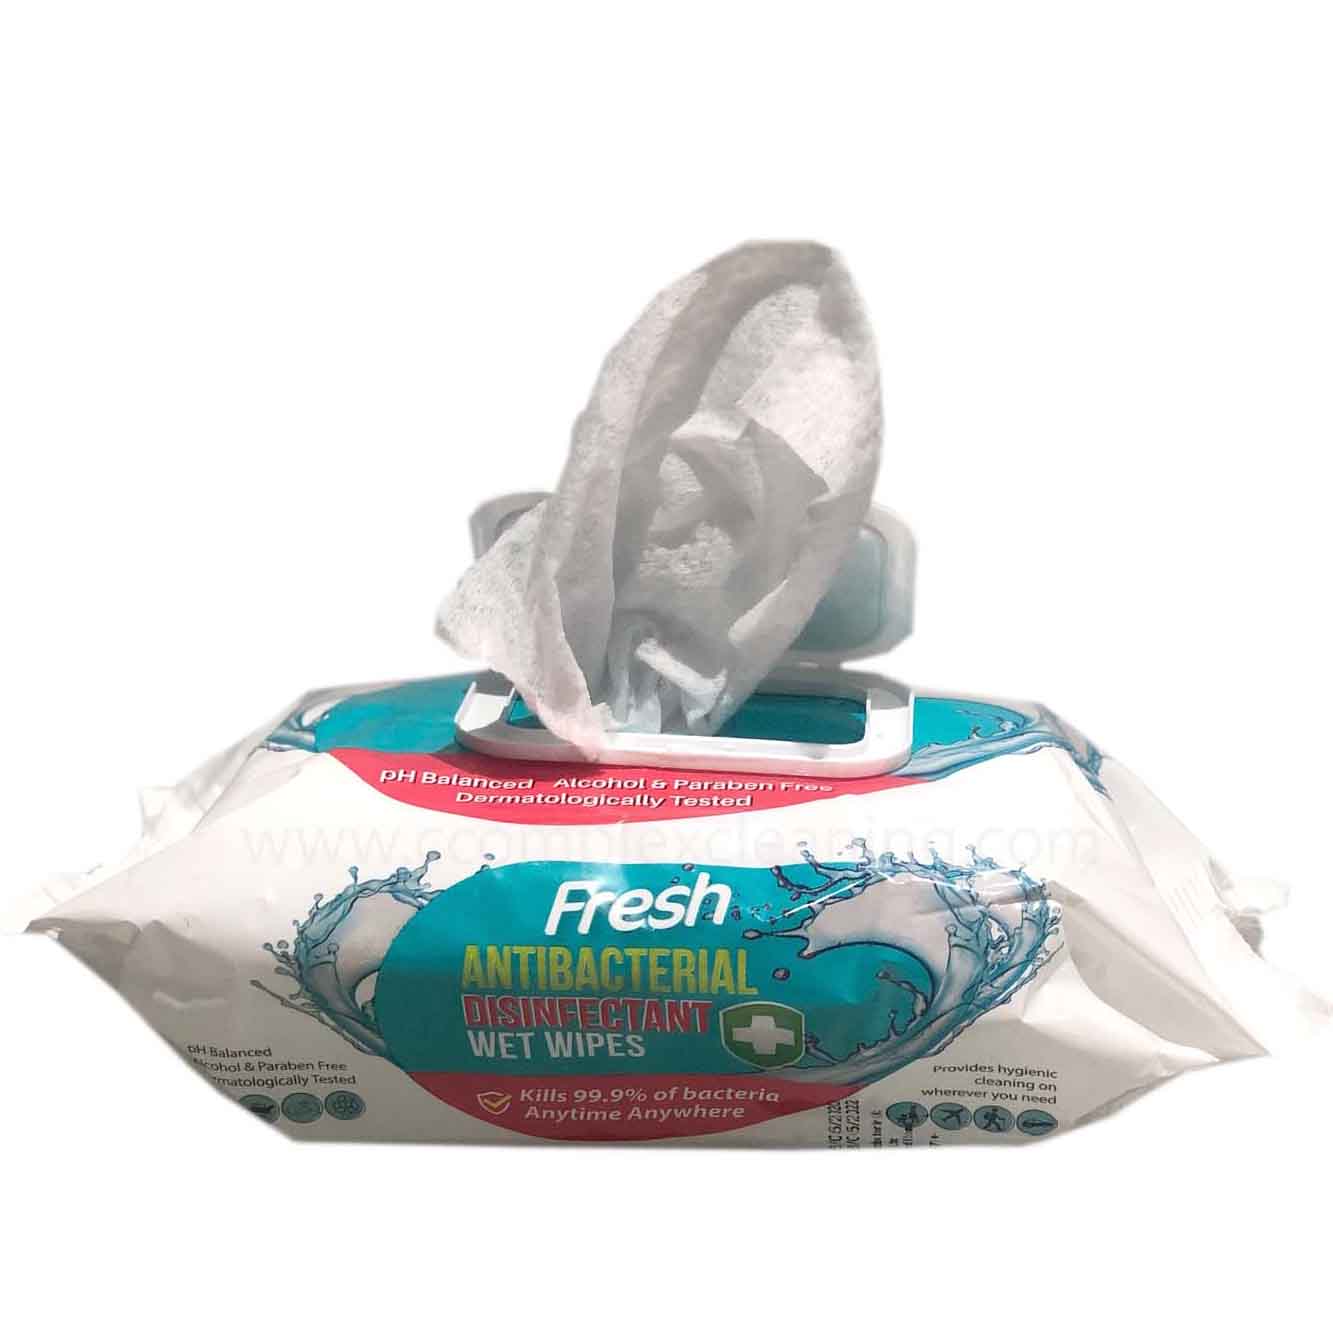 Fresh AntiBacterial Disinfectant Wet Wipes 102wipes /pack